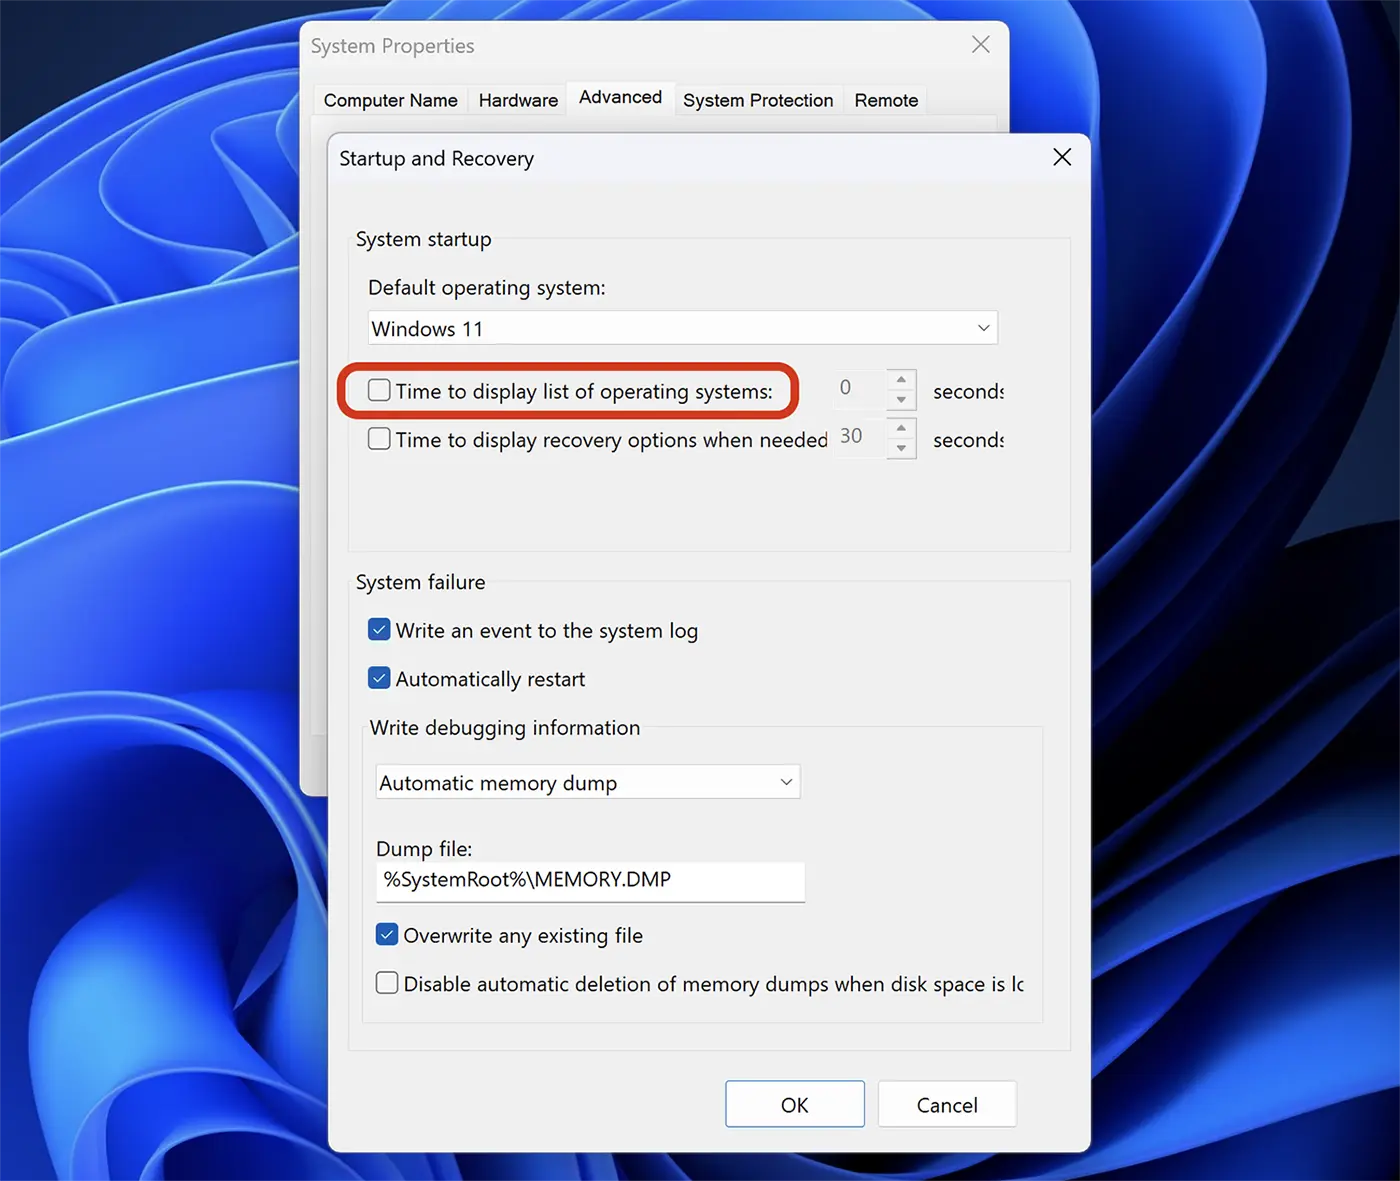 Fix Windows 11 On Volume 3, 4. Choose an operating system